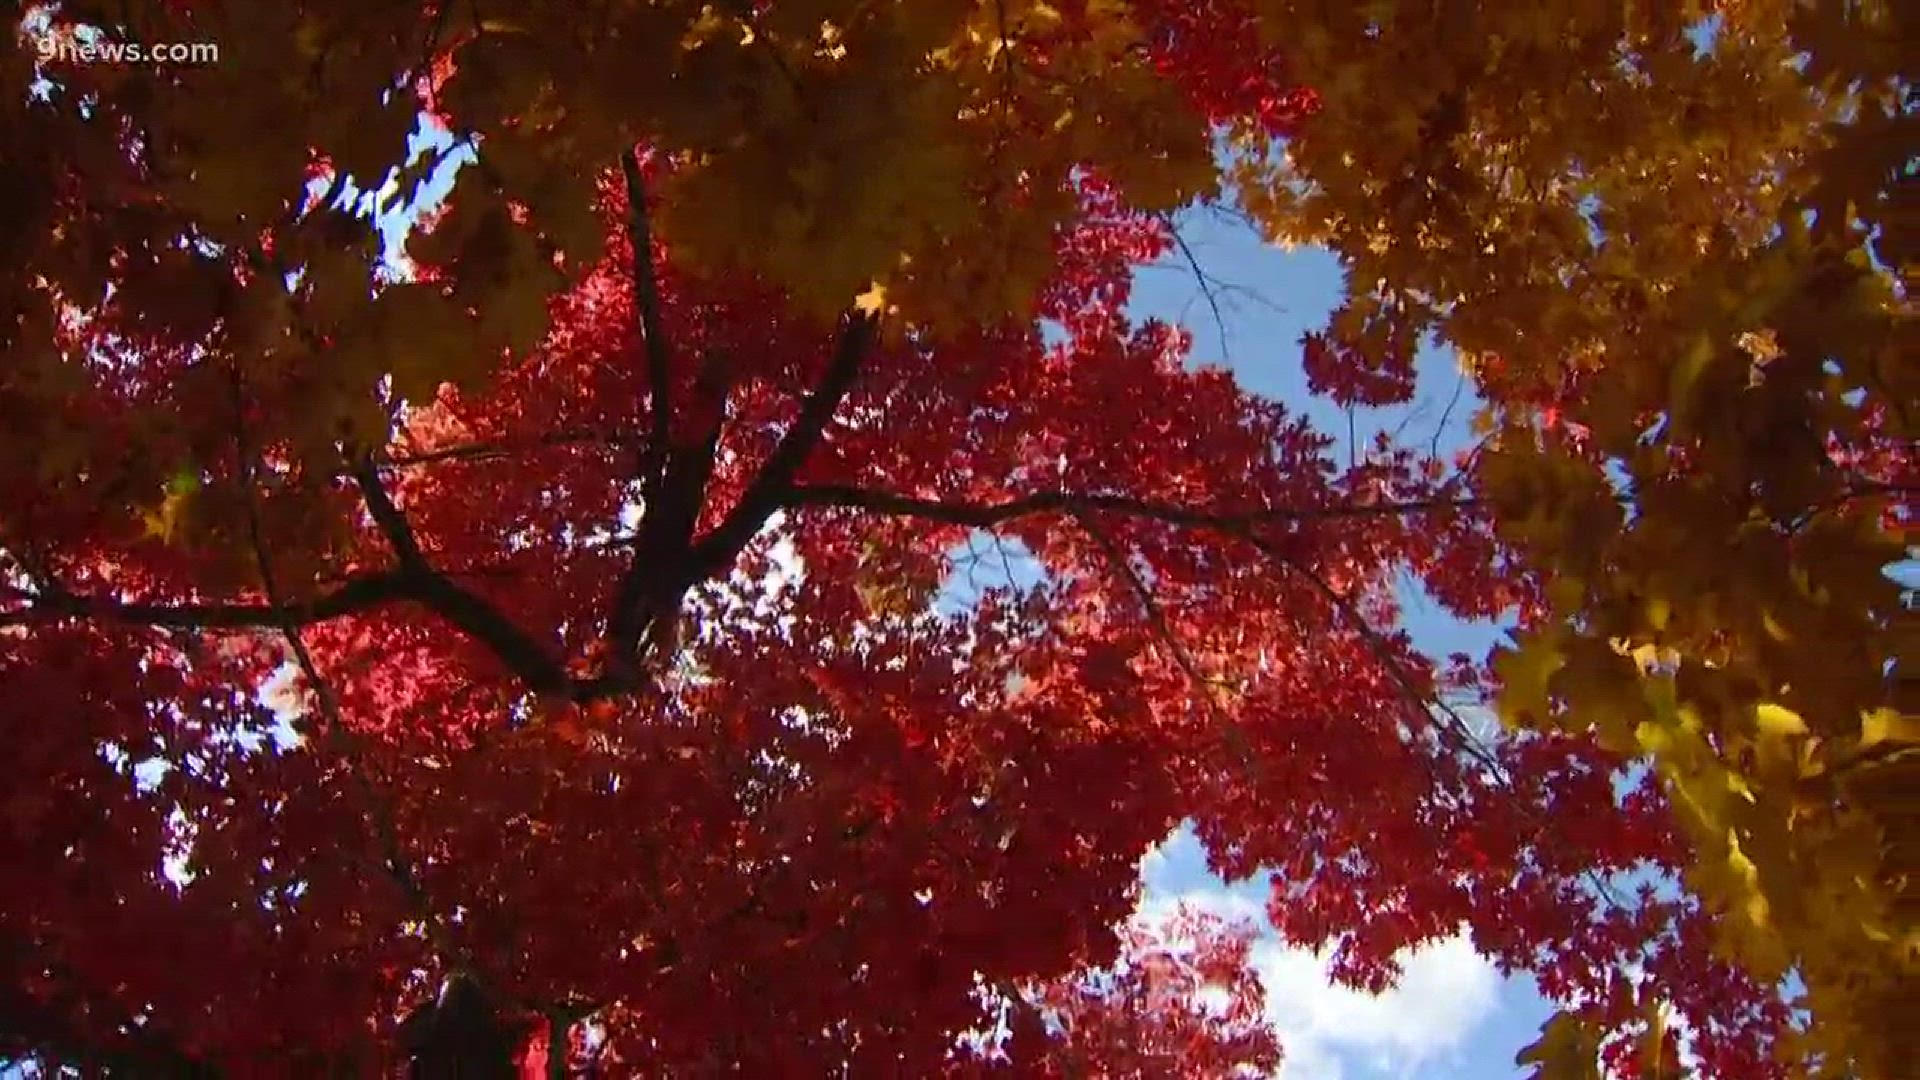 Someone stood outside of the 9NEWS building a few weeks ago and shot video of the leaves. We are airing it now.